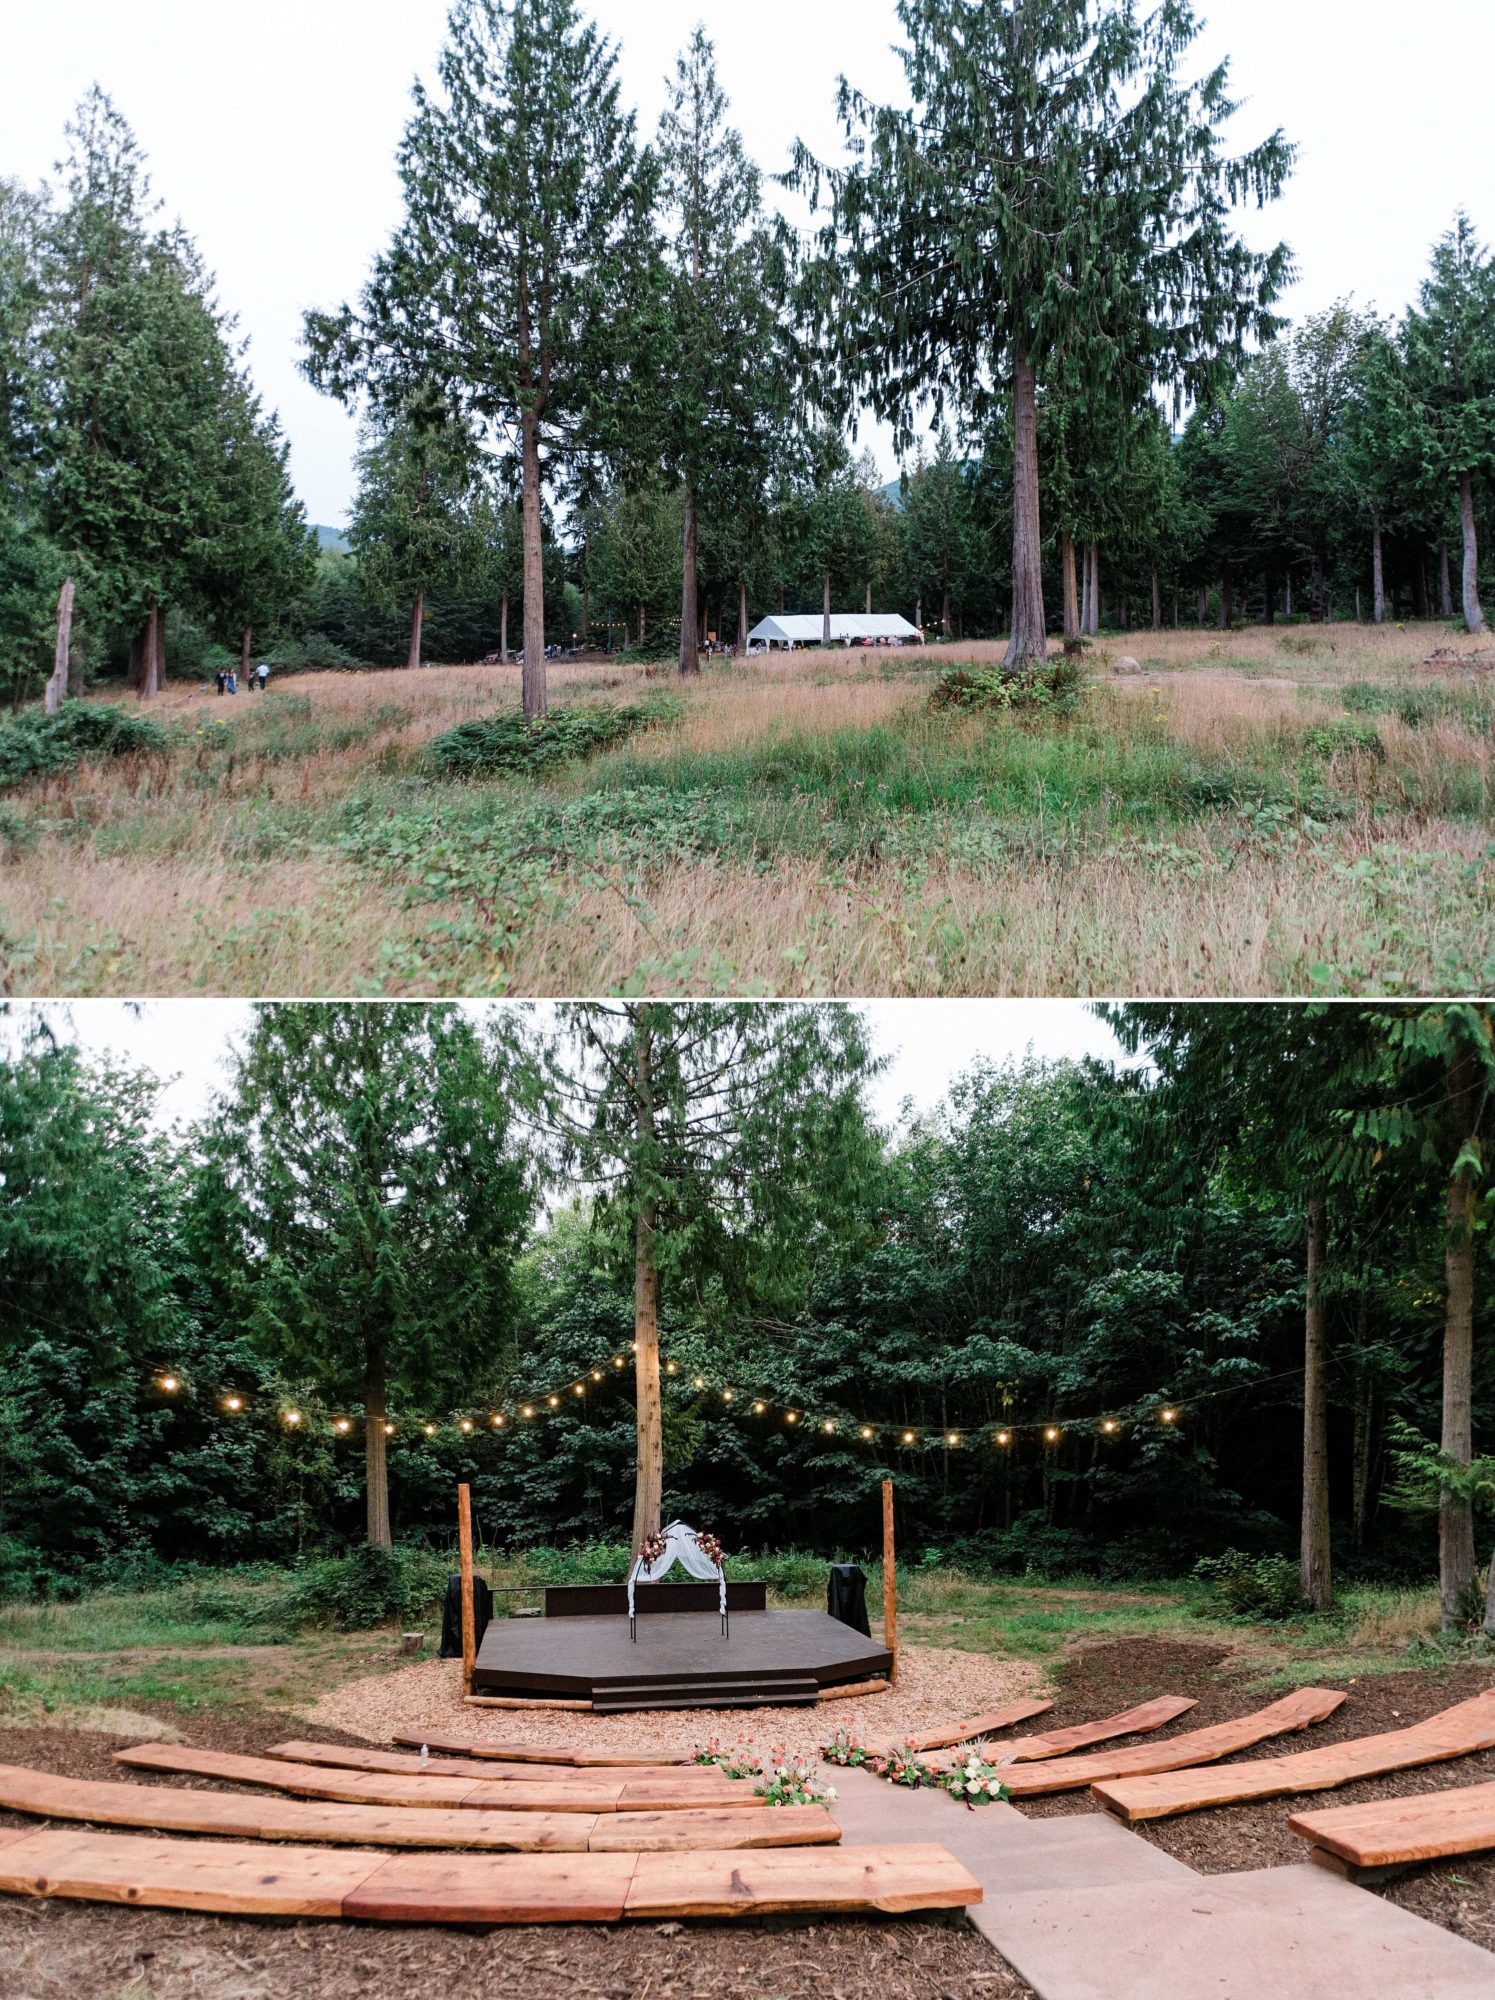 Field and Moon Amphitheater ceremony area at Misty Clover Farm Olympic Peninsula Wedding Venue